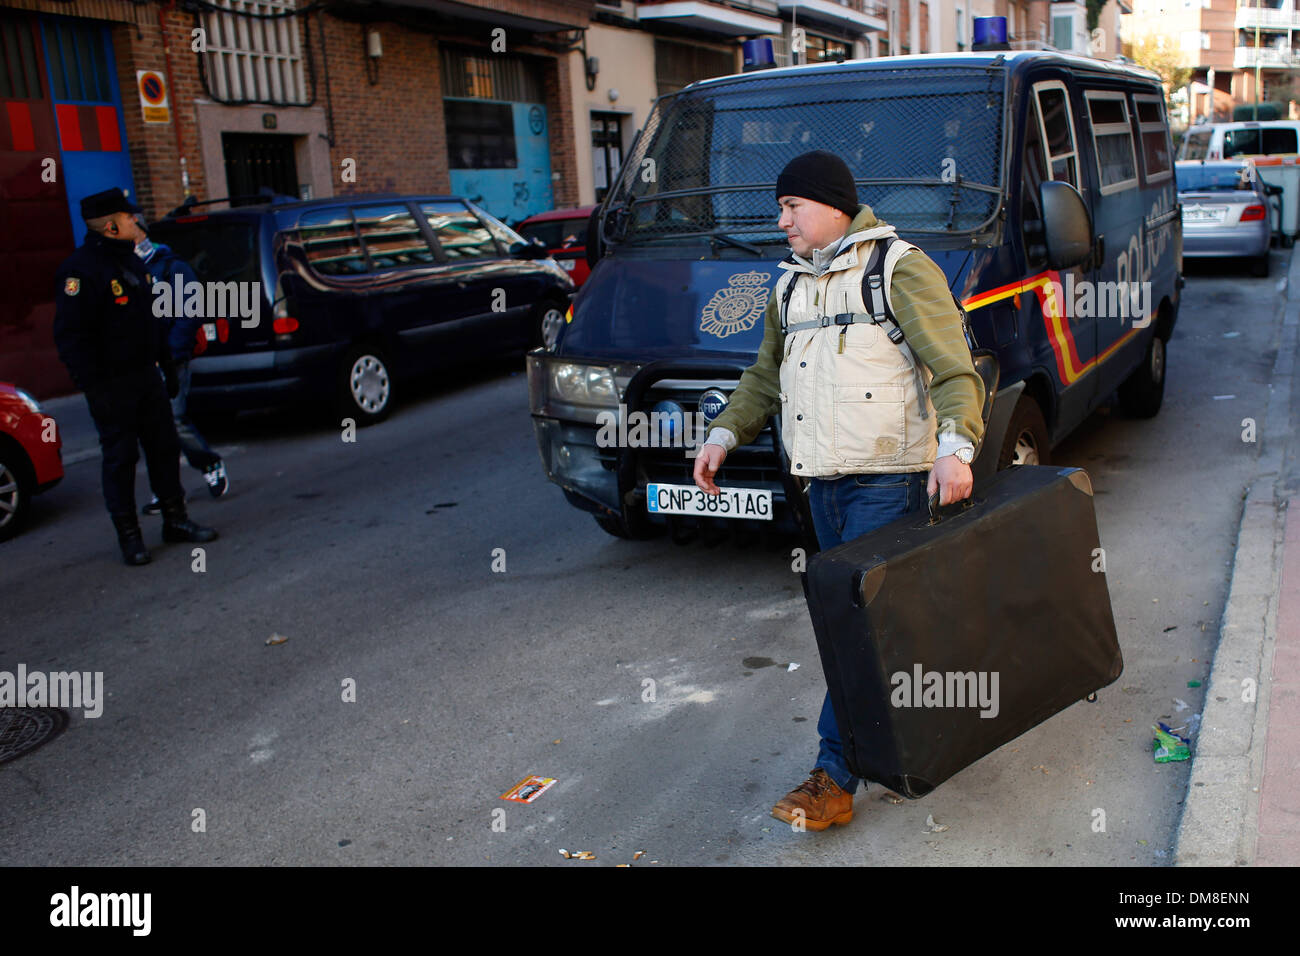 Madrid, Spain. 11th Dec, 2013. 34-year-old John Jairo Nanez Betancur from Colombia passes next to a riot police van carrying his belonglings after he was evicted from his home in Madrid, Spain, Wednesday, Dec. 11, 2013. John Nanez Betancur became unemployed after losing his job. He bought a euro 213.000 ($ 291.360) apartment by taking a mortgage with Bankia bank in 2005 but stopped paying due to his financial situation in 2010. He lived in the apartment with Jose Arcila 50 years old, his wife Betsi Ojeda, 33 years old, both unemployed, and Betsi's daughter, Nicole Marin, 4 years old. The evic Stock Photo